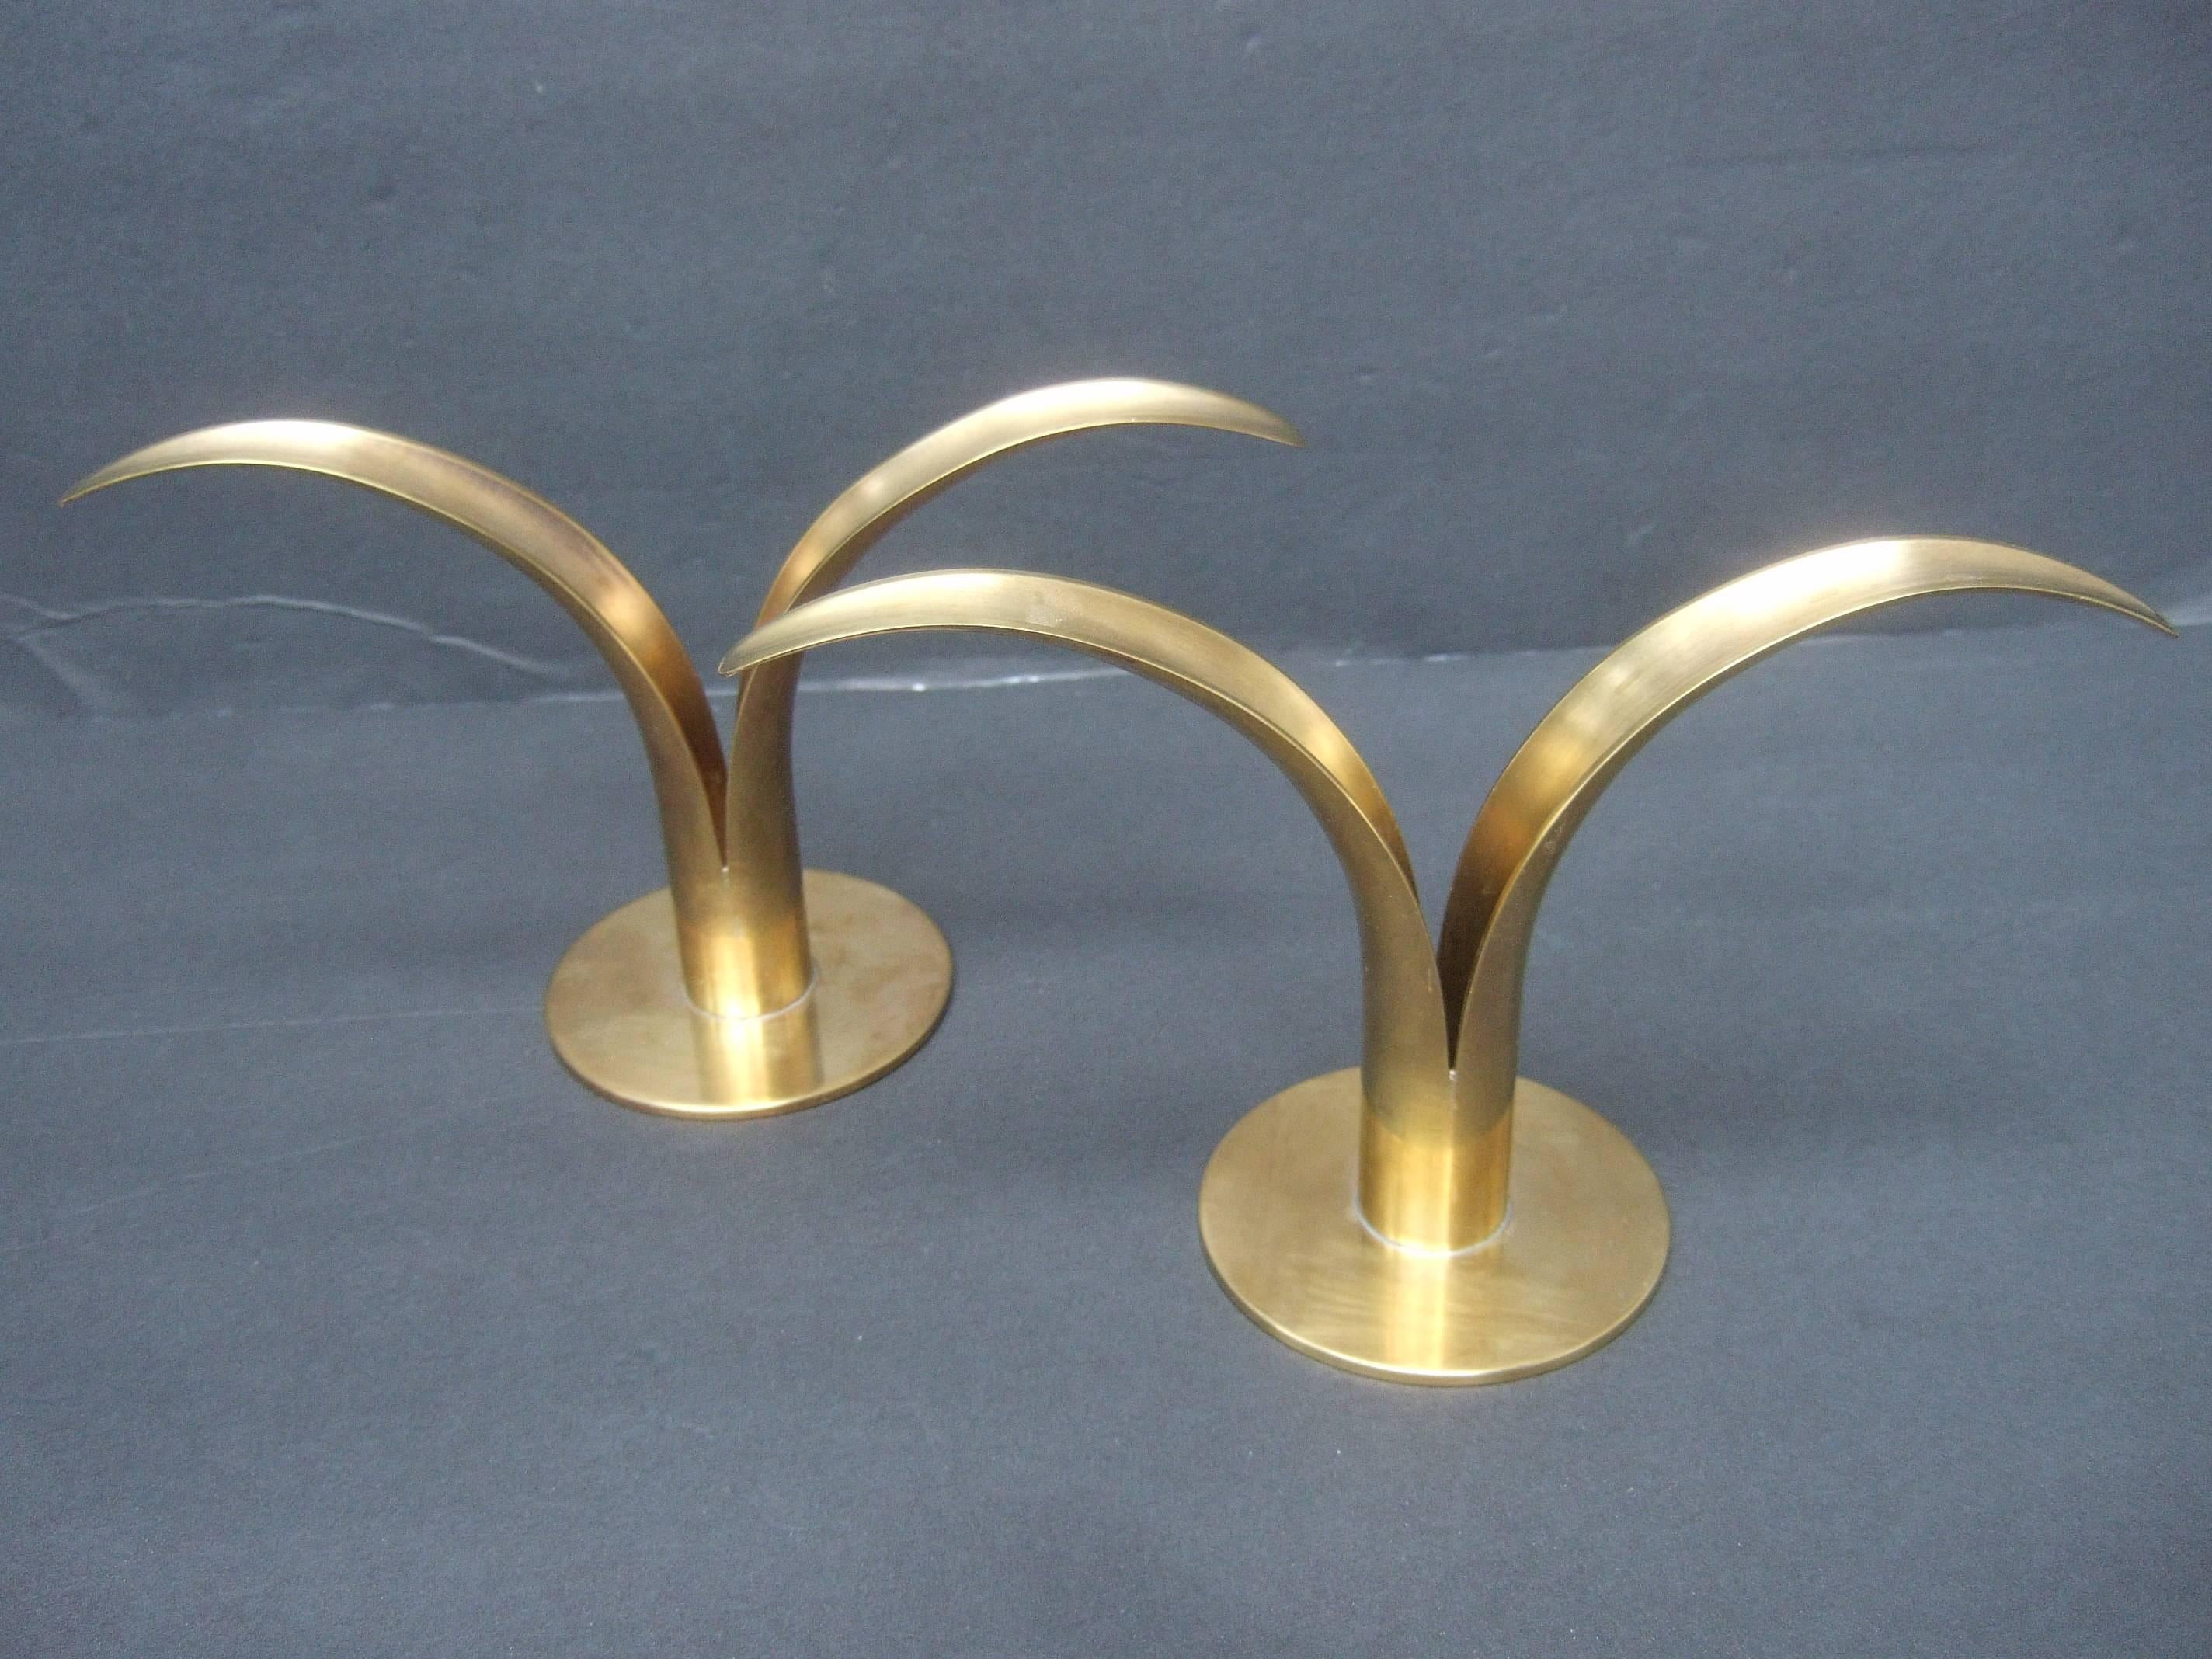 Sleek pair of Danish modern fluted brass metal candle holders
The stylized brass metal candle holders have a severe
minimal mid century design 

Each of the diminutive candle holder is designed with curved 
bands that emulate organic foliage.